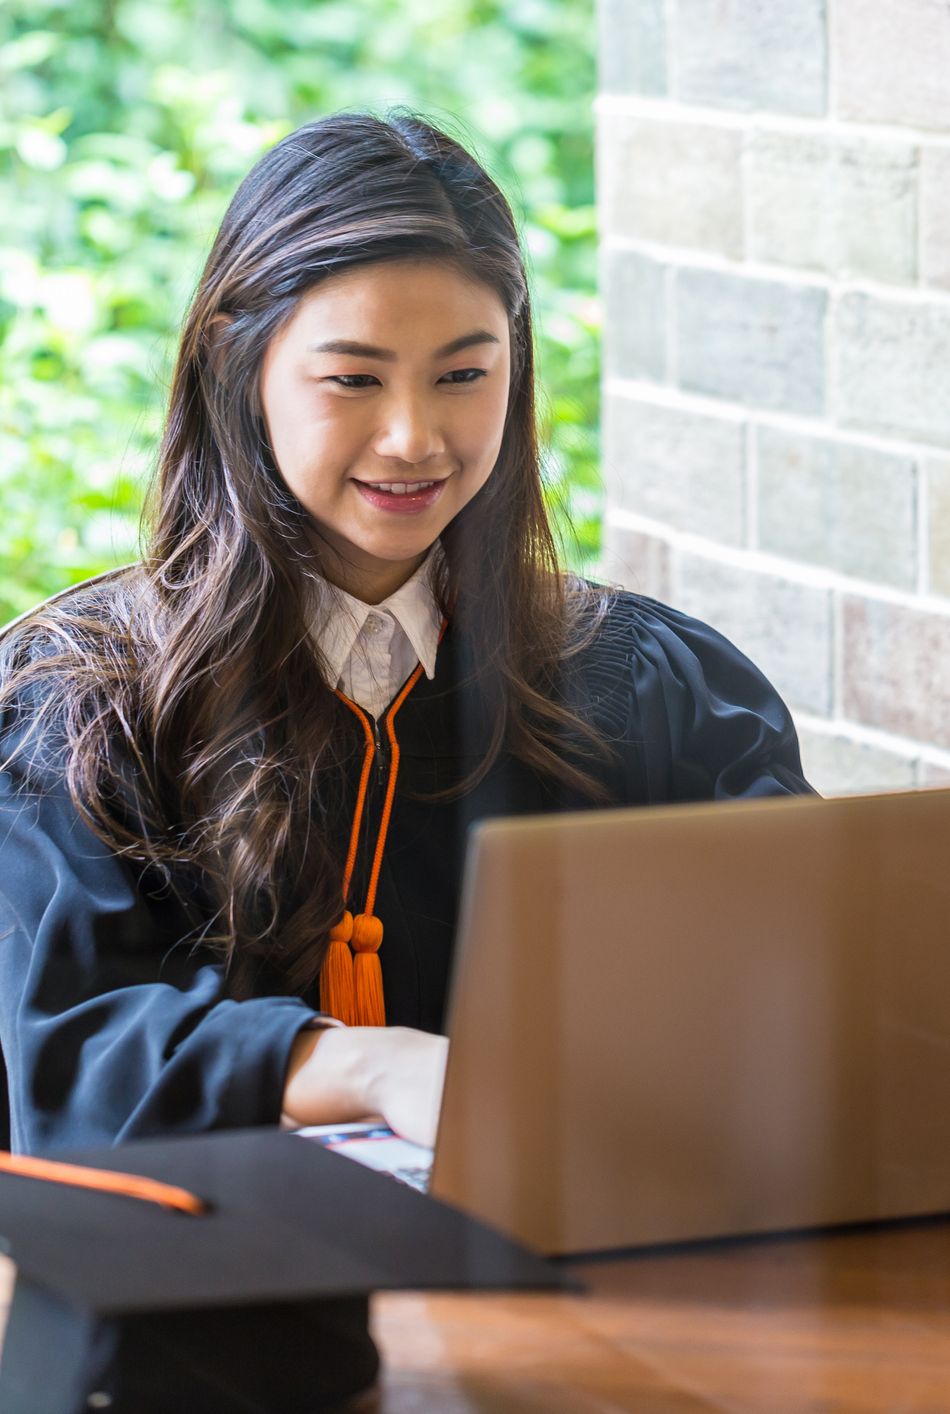 5 Tips on Planning a Memorable Virtual Graduation for The Class of 2020